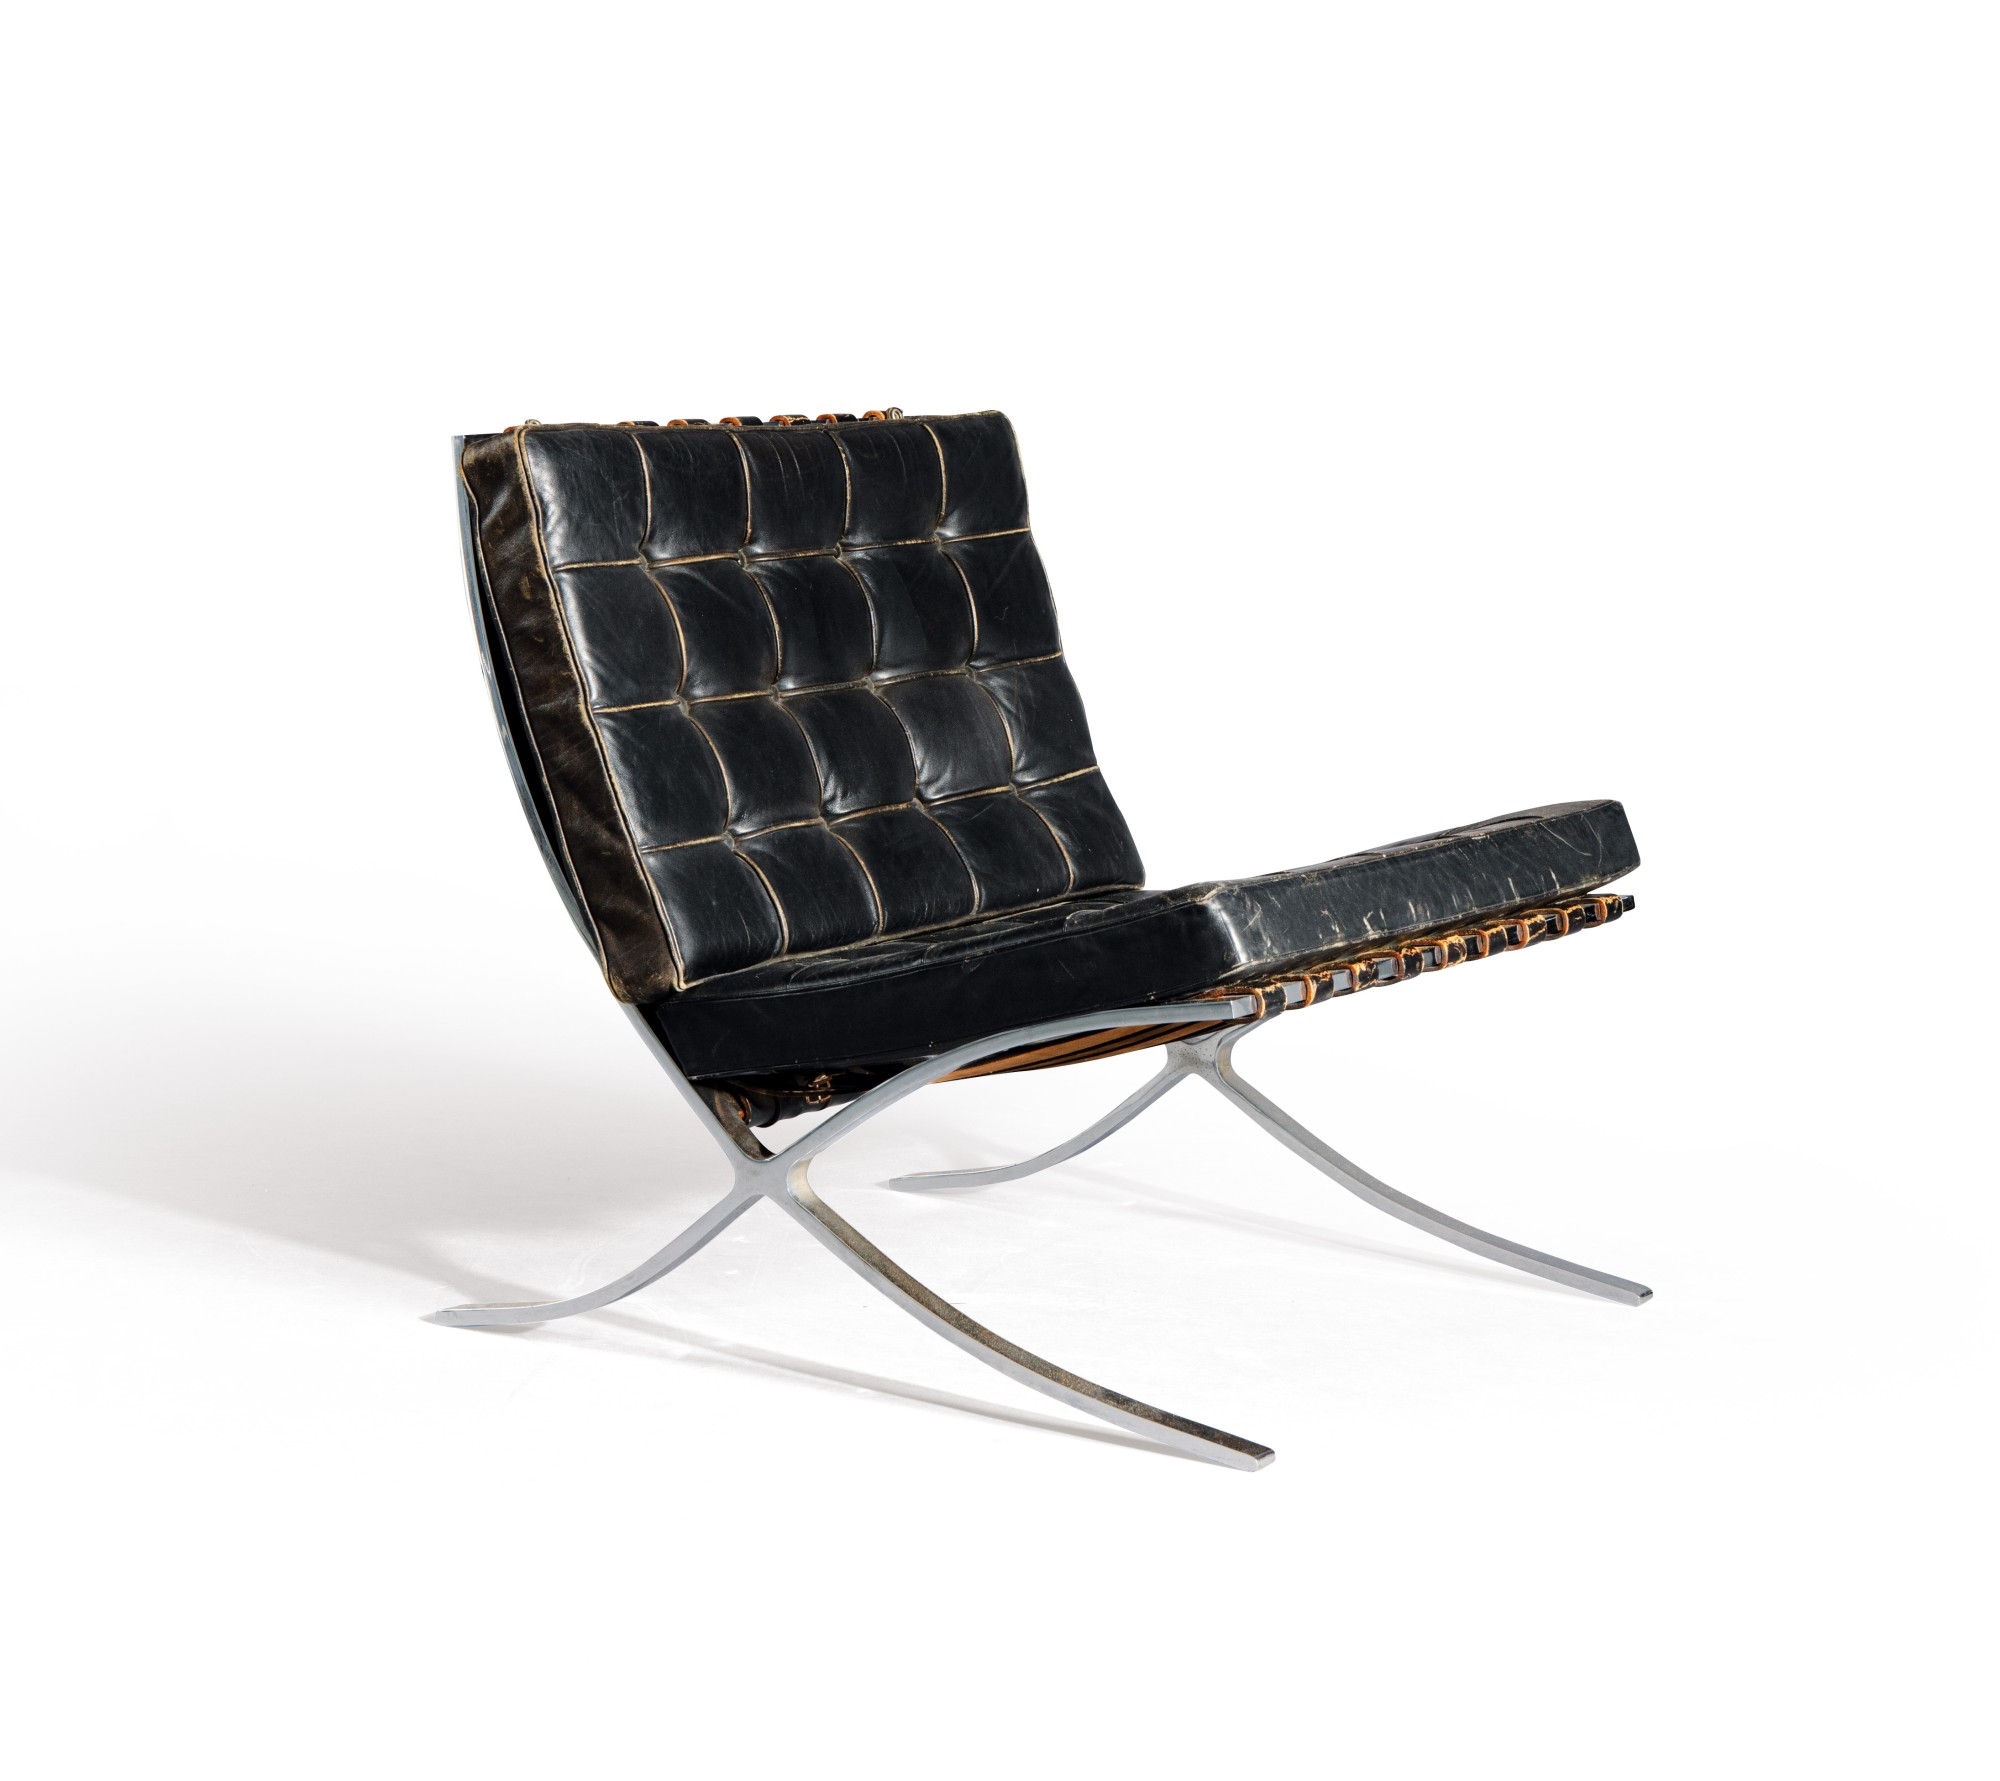 Barcelona chair by Ludwig Mies van der Rohe, designed in 1929